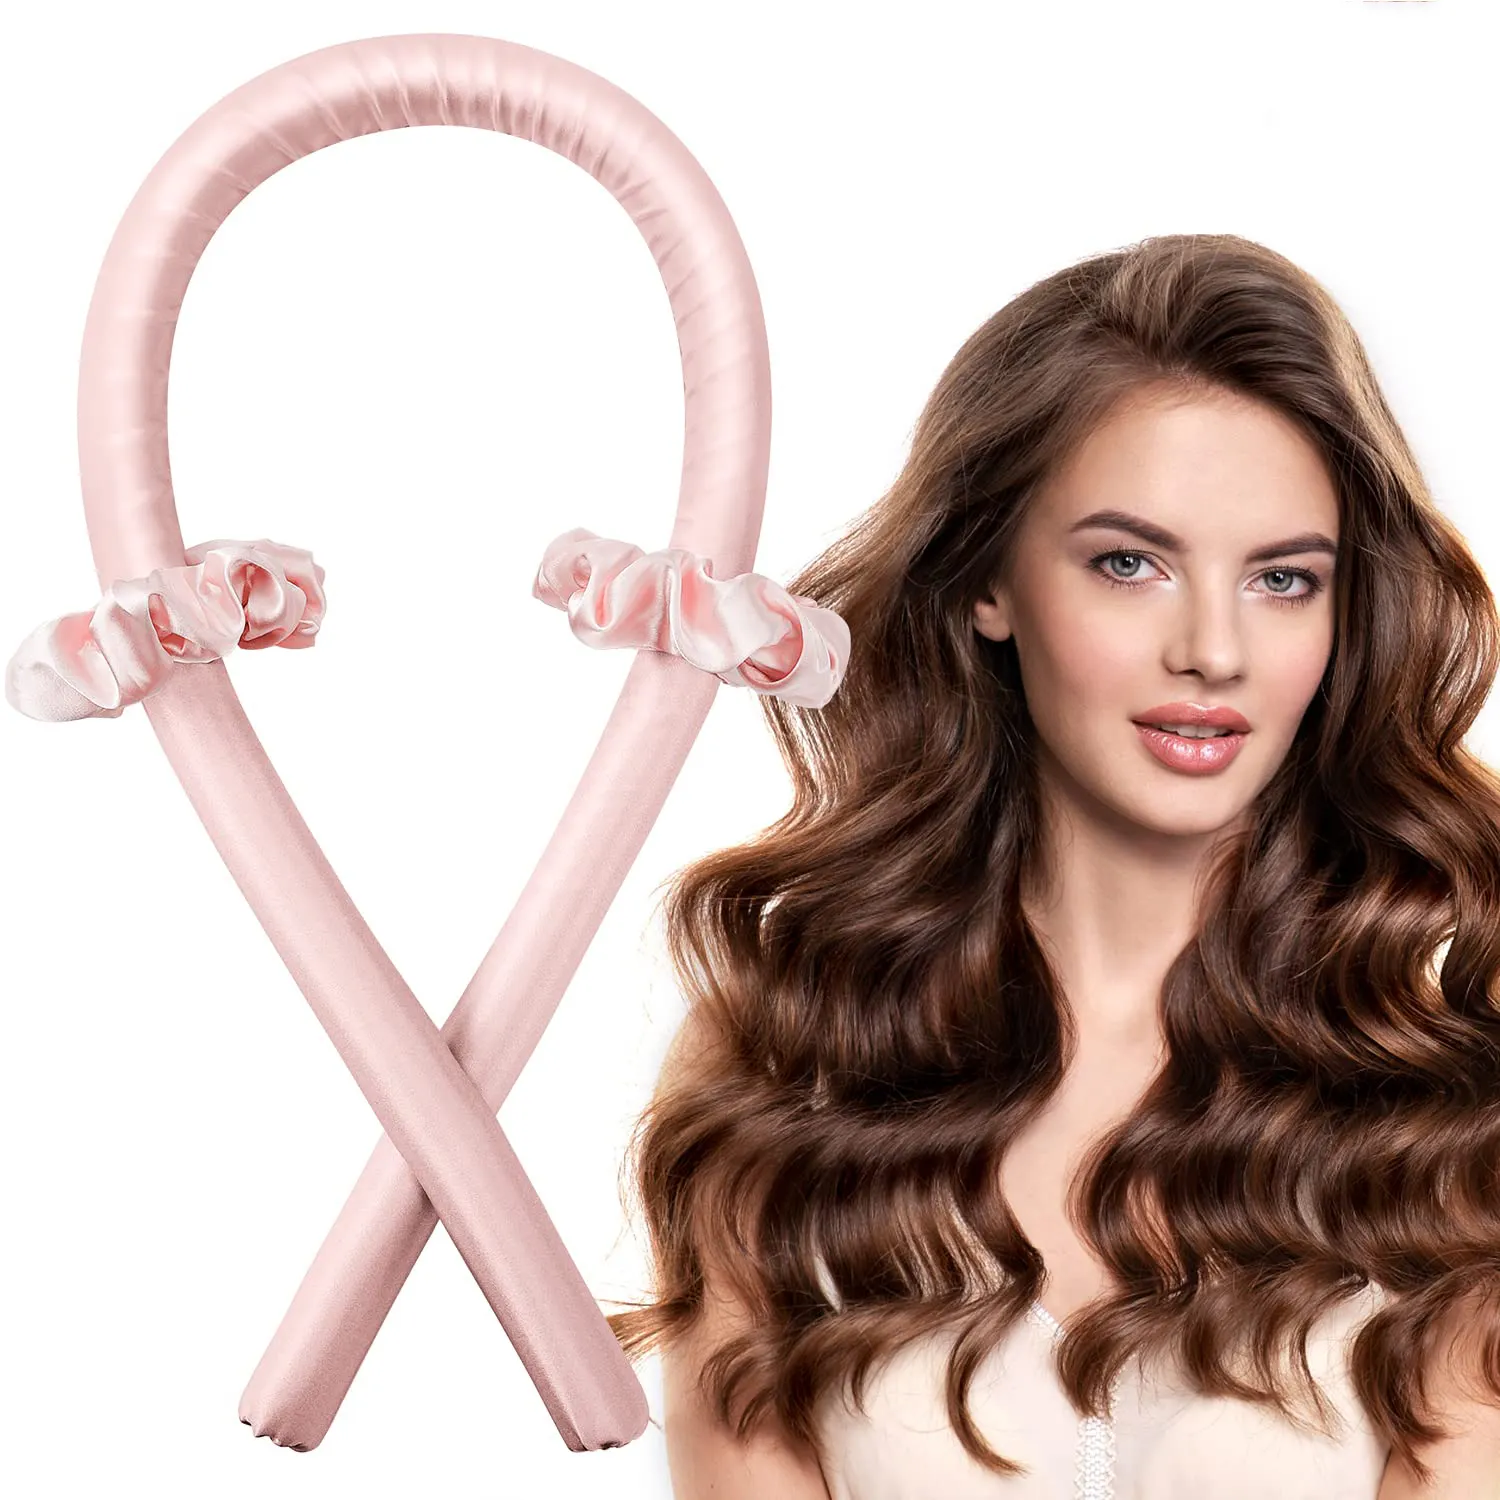 No Heat Heatless Curling Rod Headband to Sleep in Curl Ribbon with Scrunchies Hair Clips Overnight Soft Hair curler Rollers